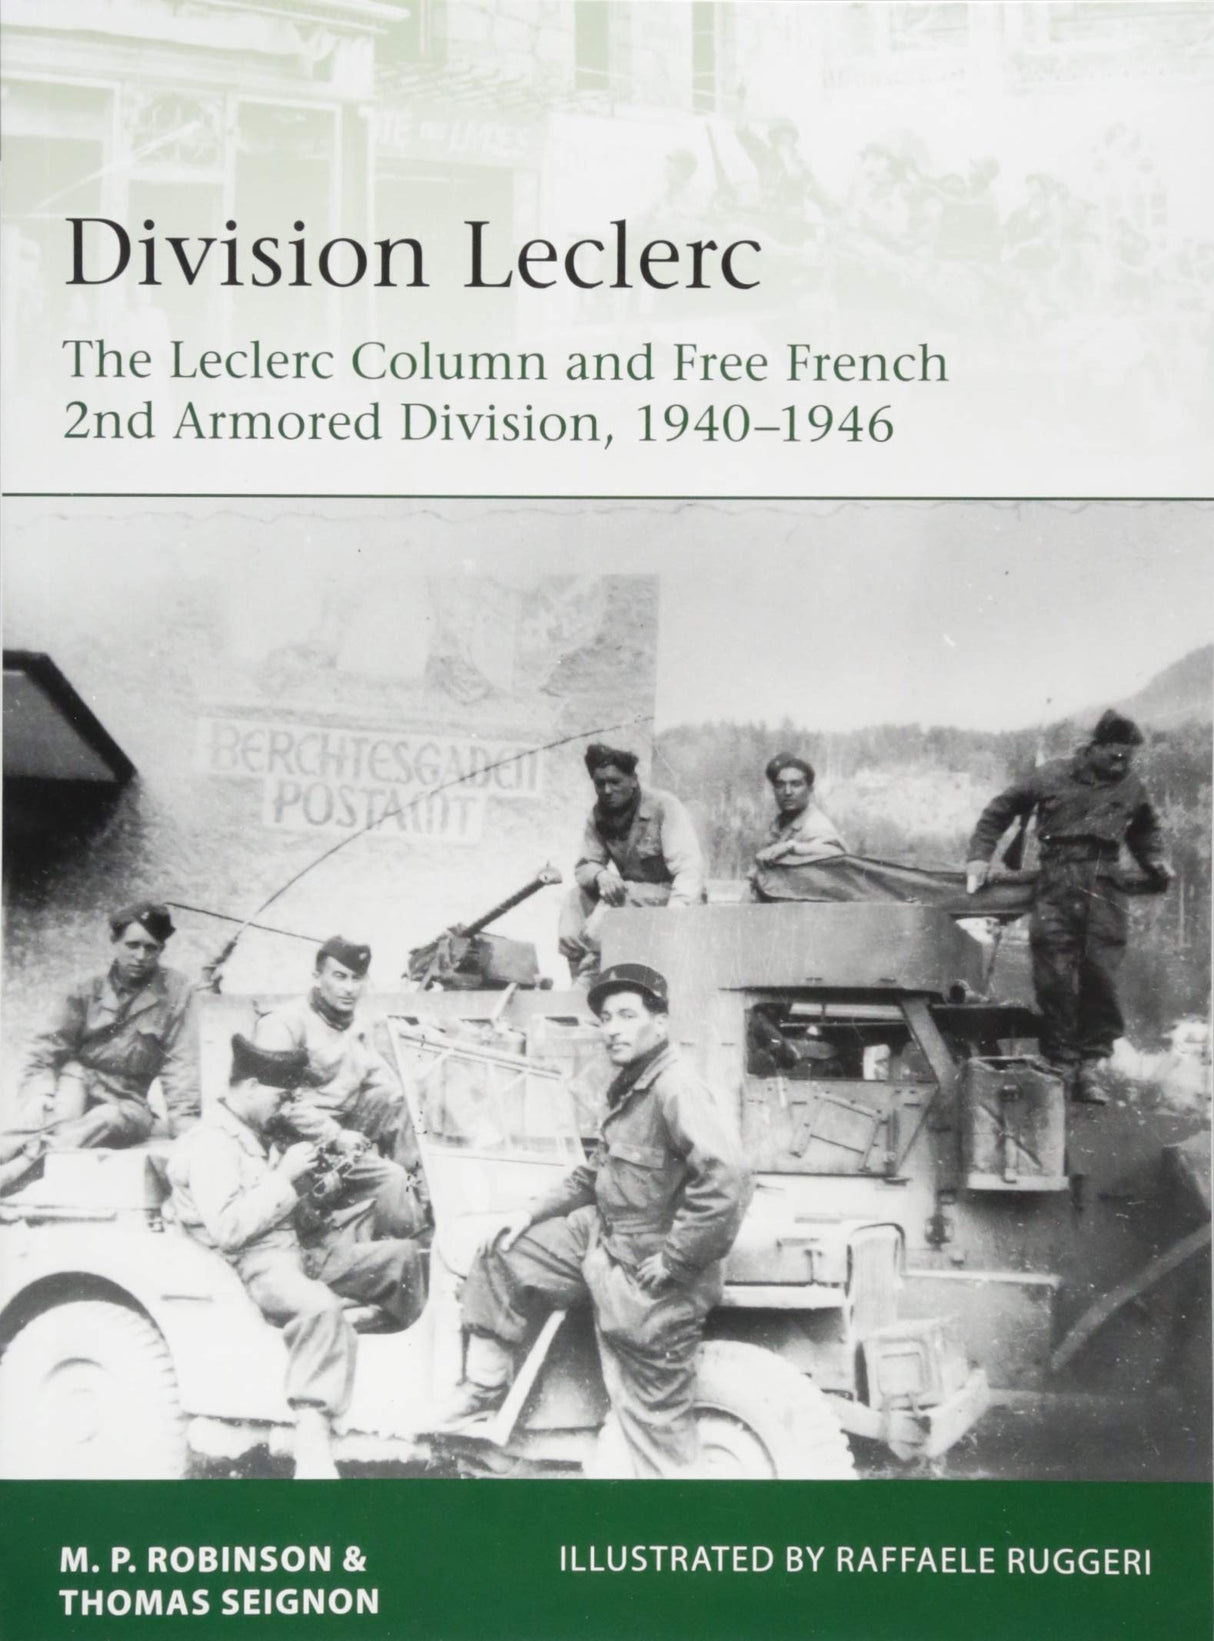 Division Leclerc: The Leclerc Column and Free French 2nd Armored Division, 1940-46 - The Tank Museum